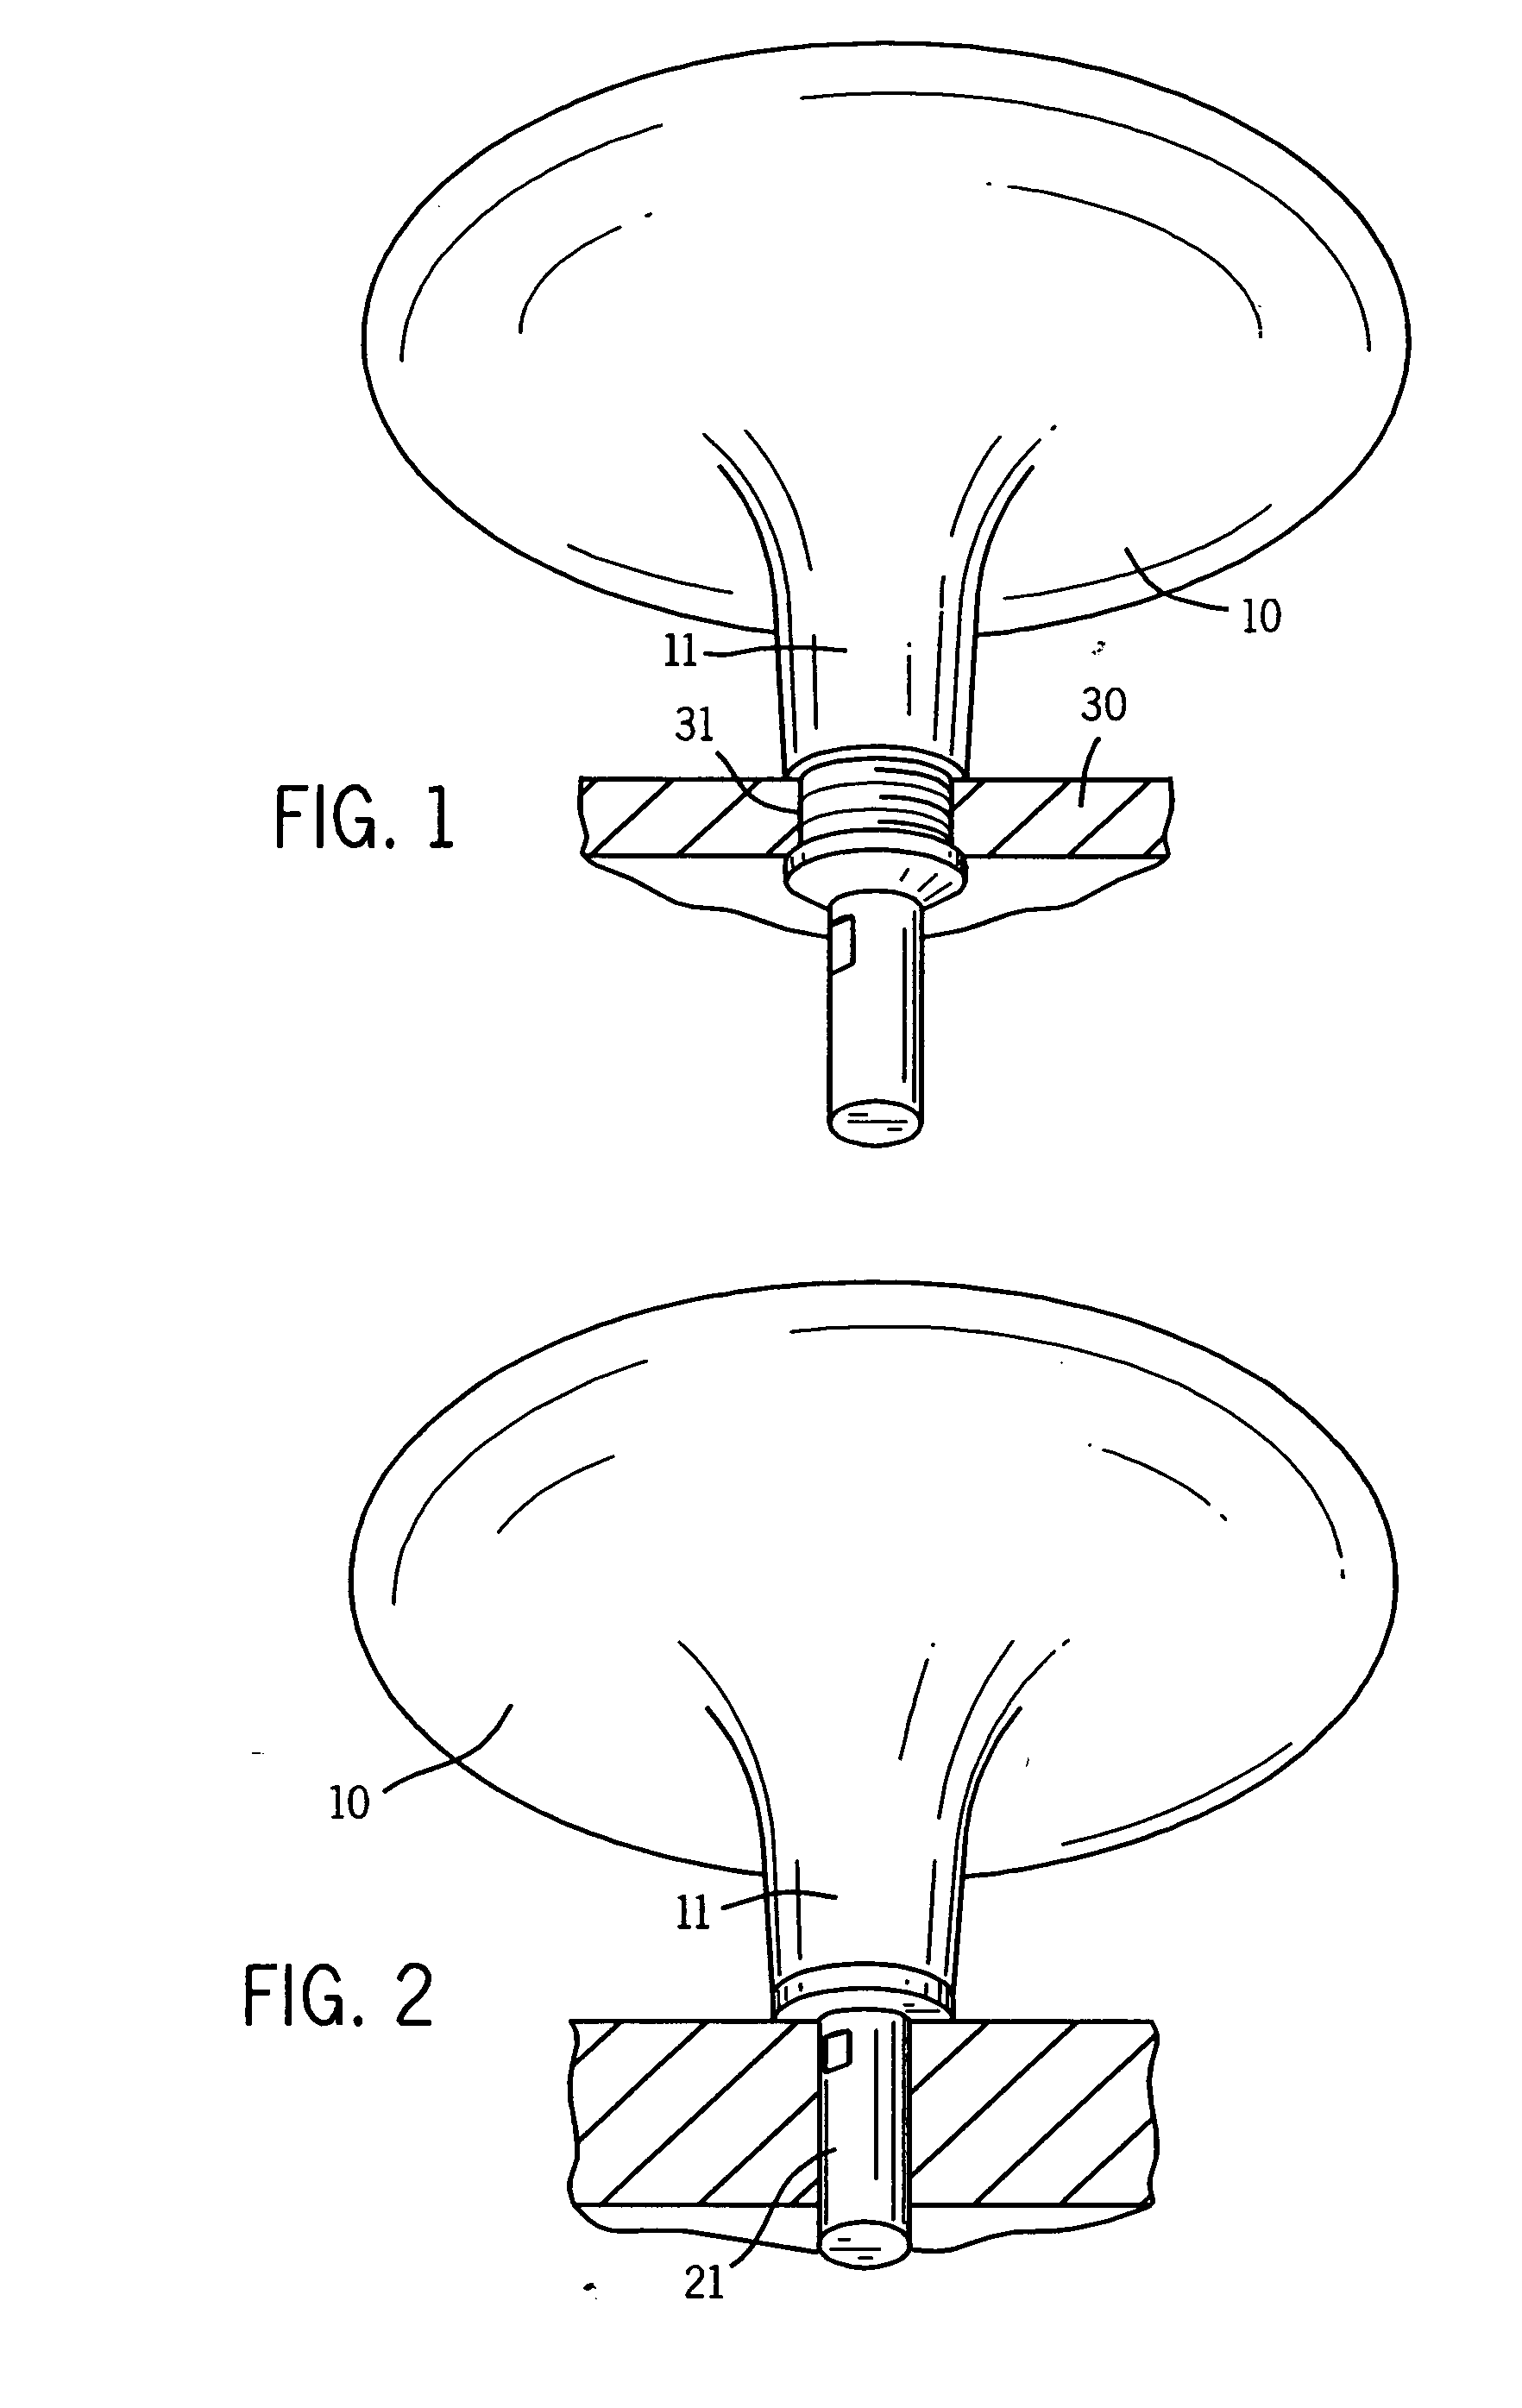 Drain outlet with integral clamp for use with a plumbing fixture